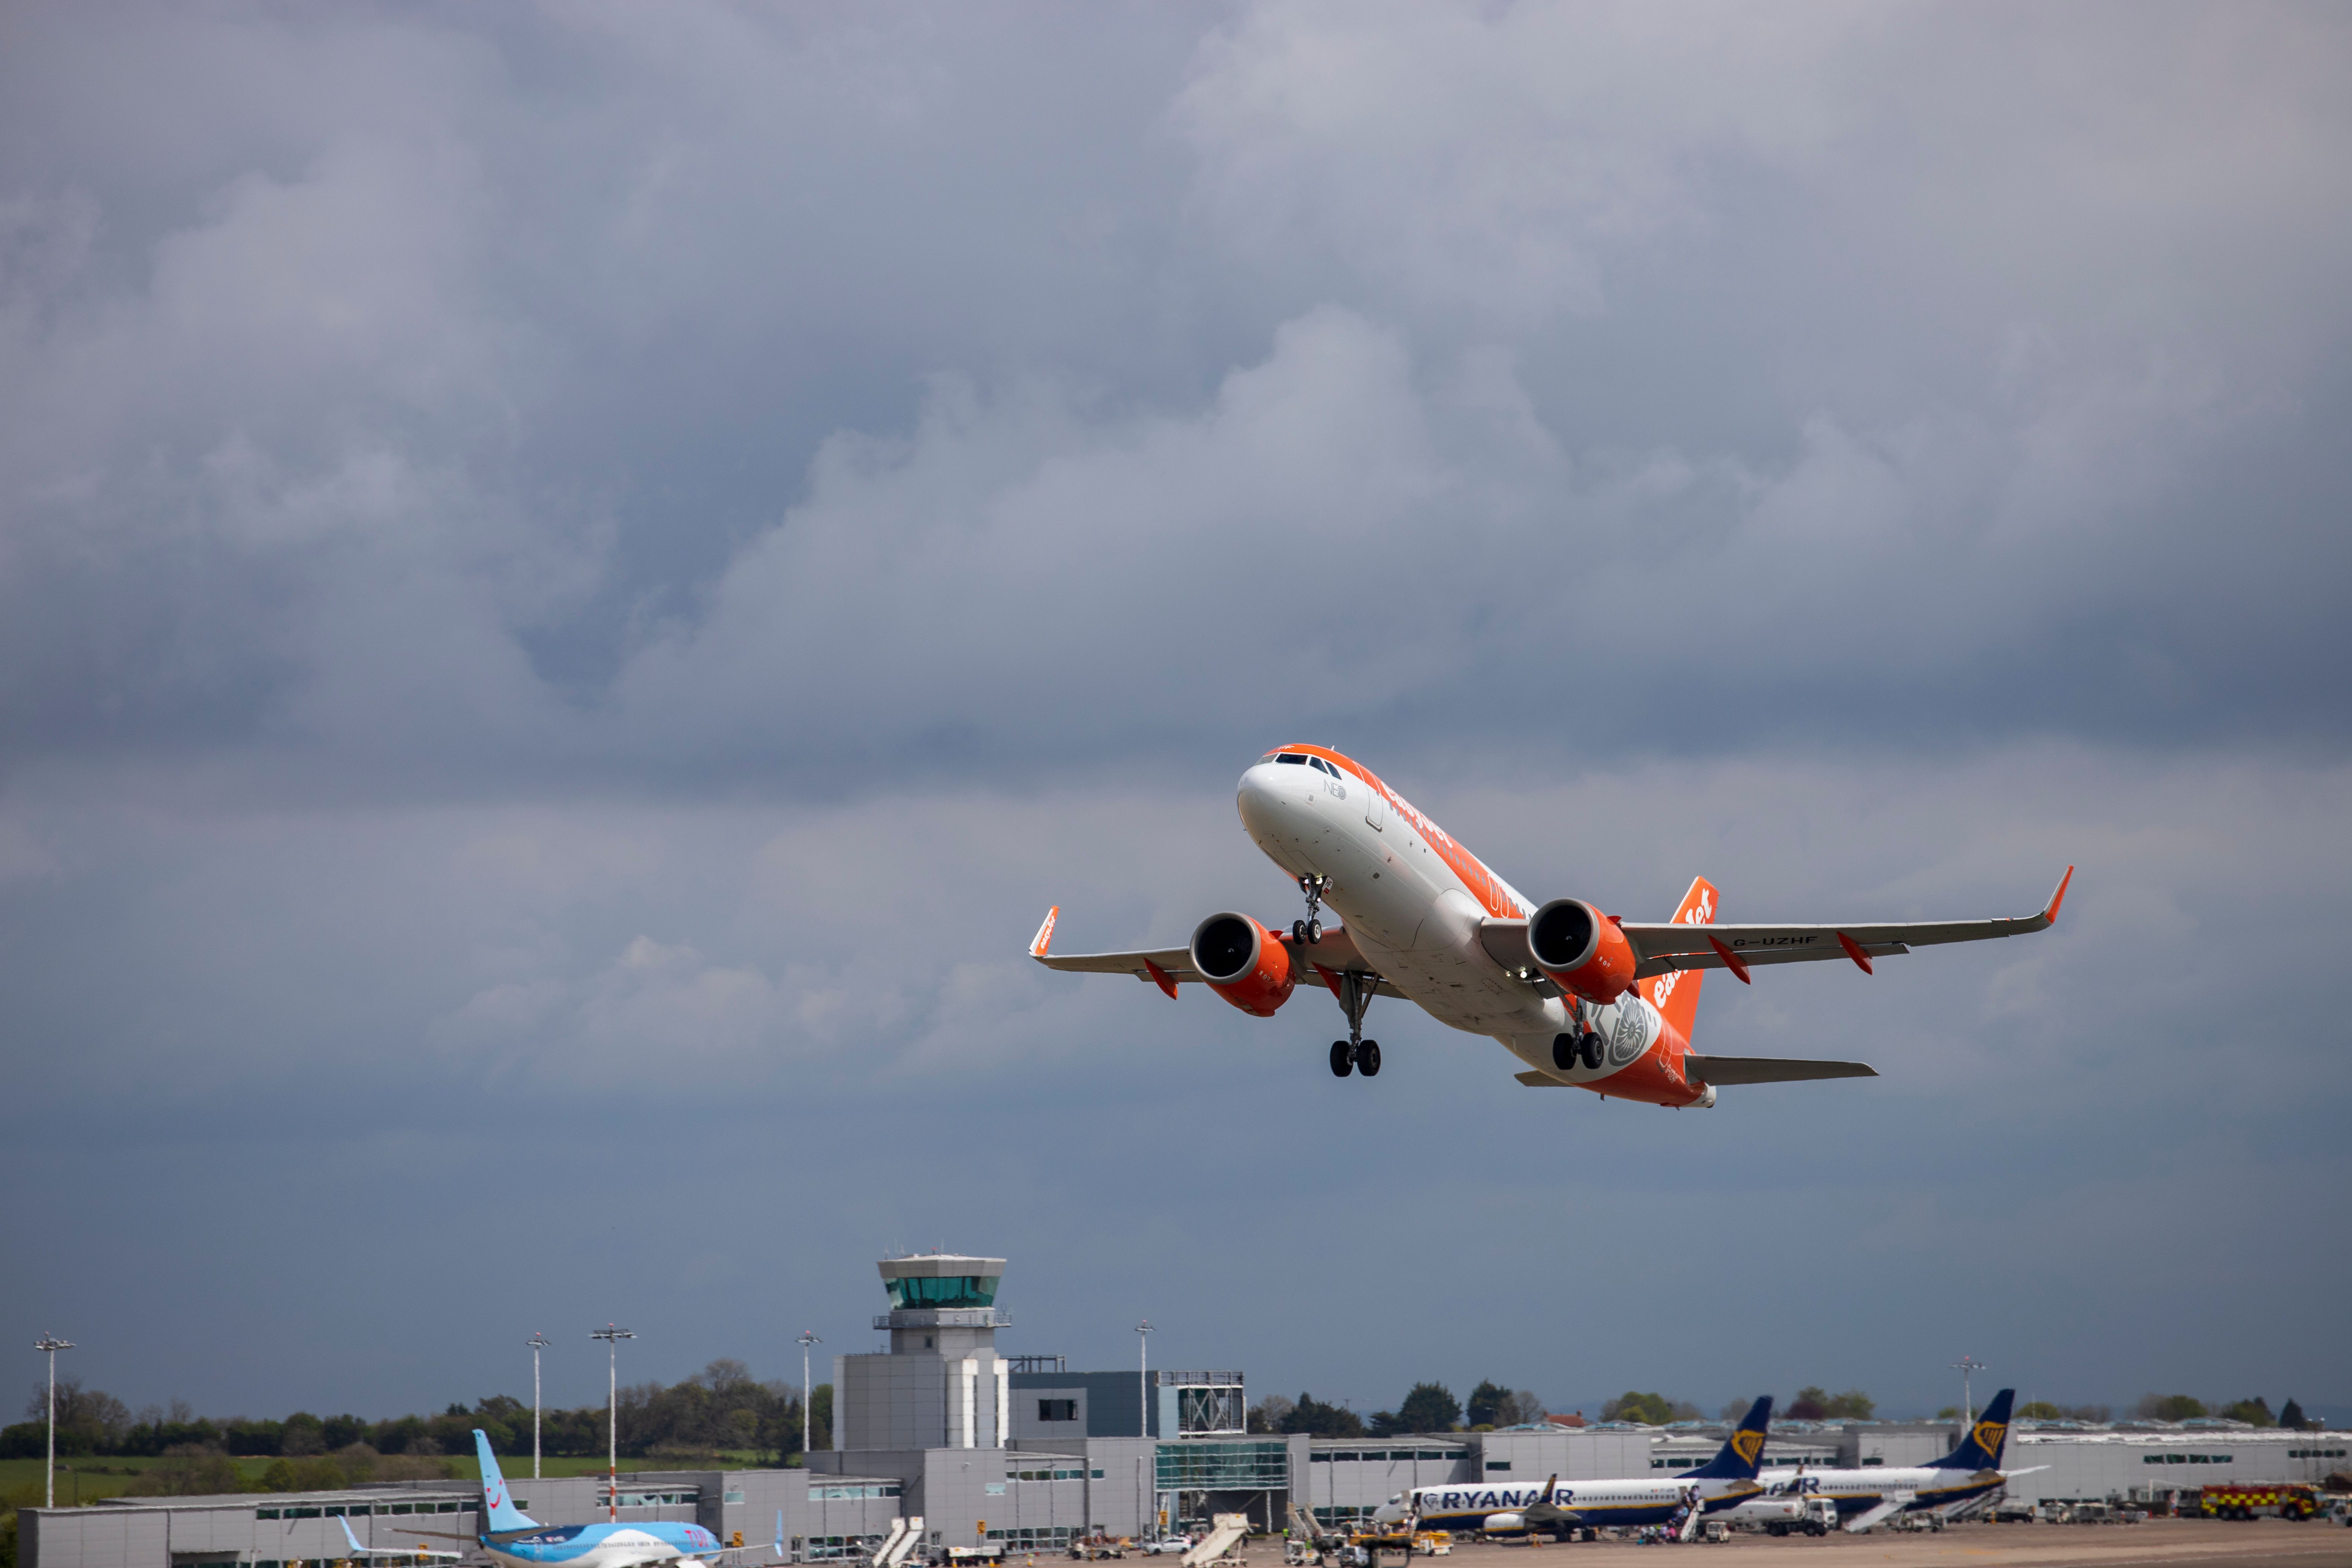 easyJet Airbus A320neo departing from Bristol Airport.